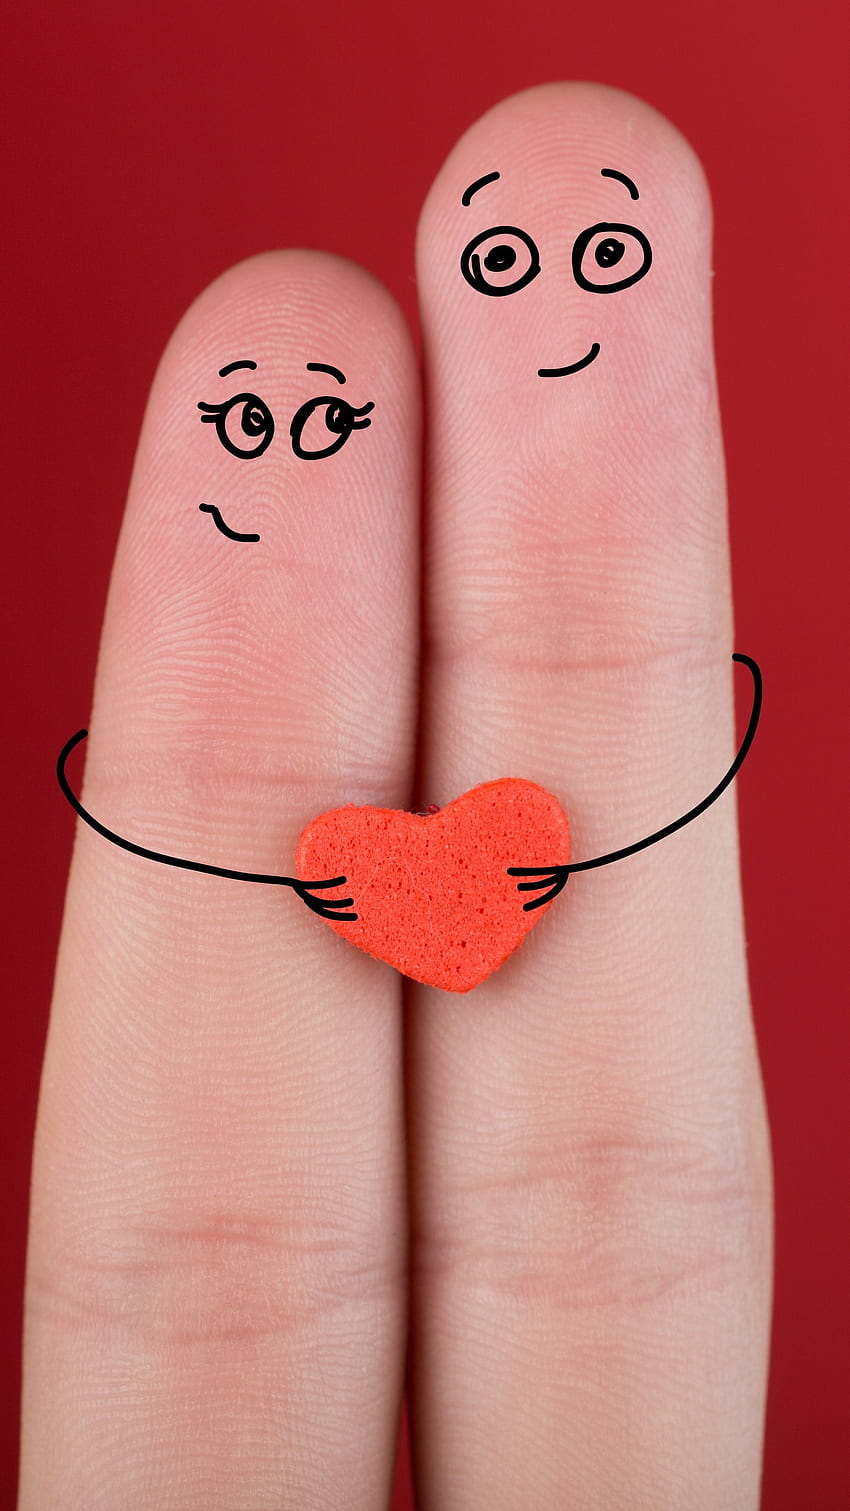 Heart Hand Gesture Vector Hd Images, Hand Draw Gesture Of With Cute Heart,  Set, Palm, Finger PNG Image For Free Download